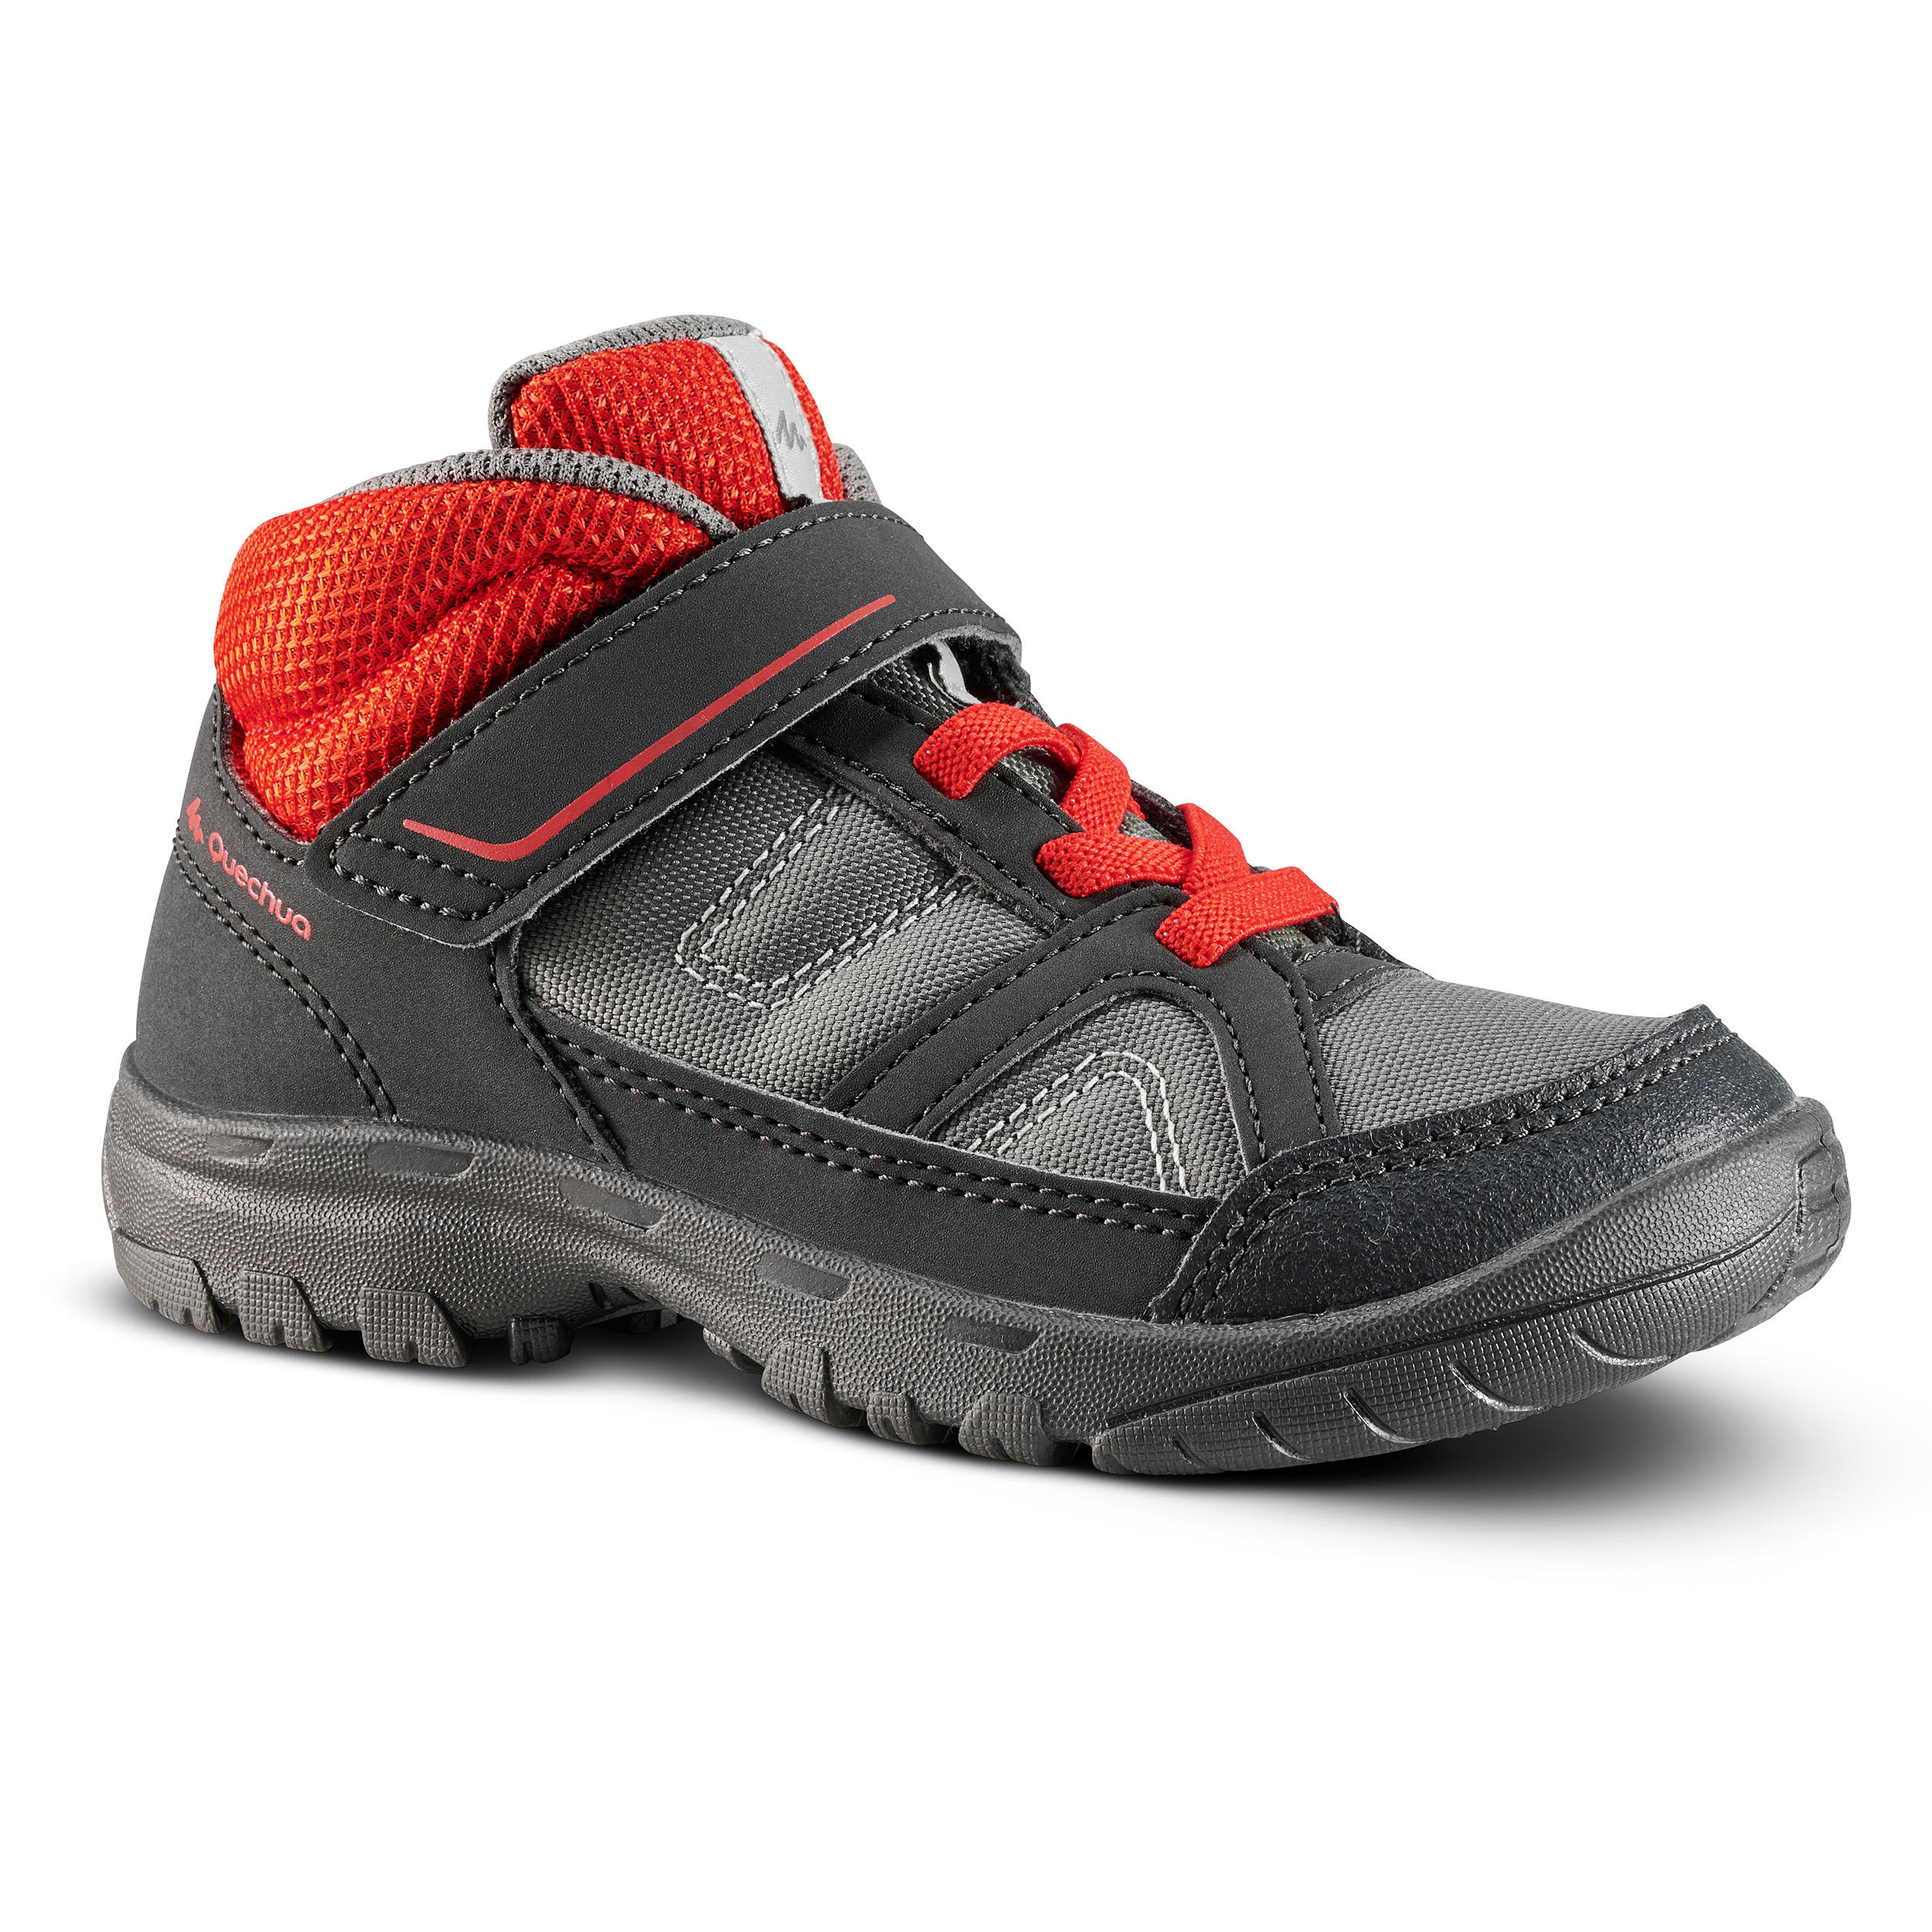 Kids High Top Hiking Shoes MH 100 MID KID 24 TO 34 - Grey/Red 1/6